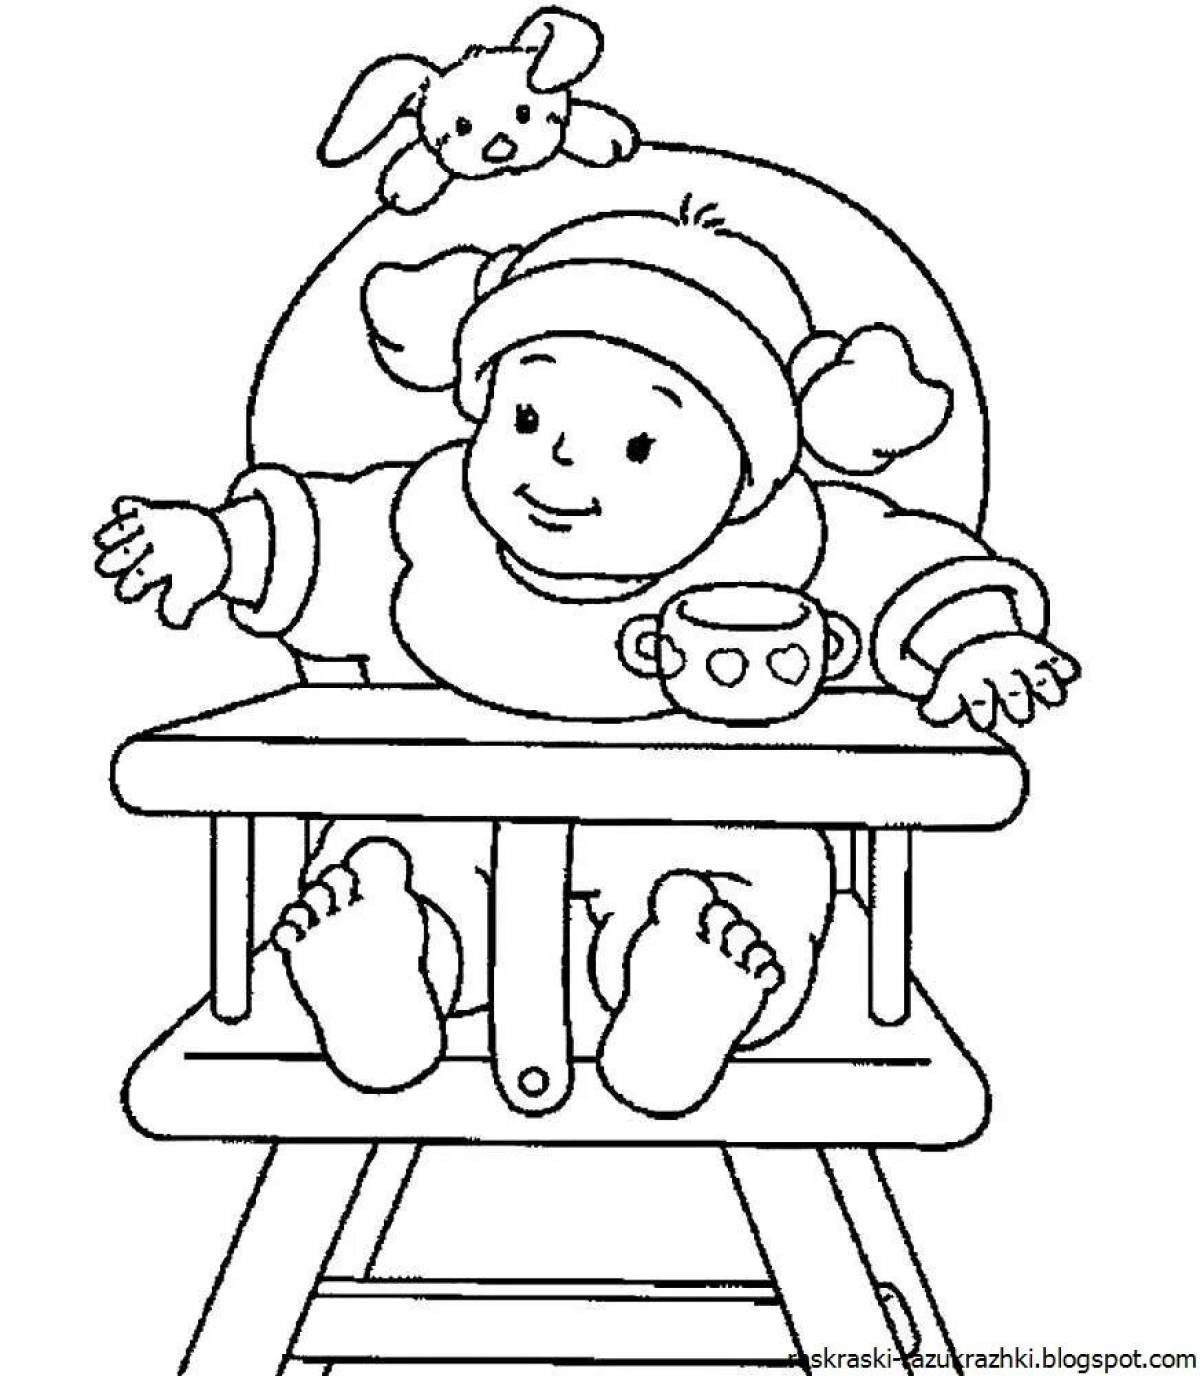 Exquisite coloring pages for dolls